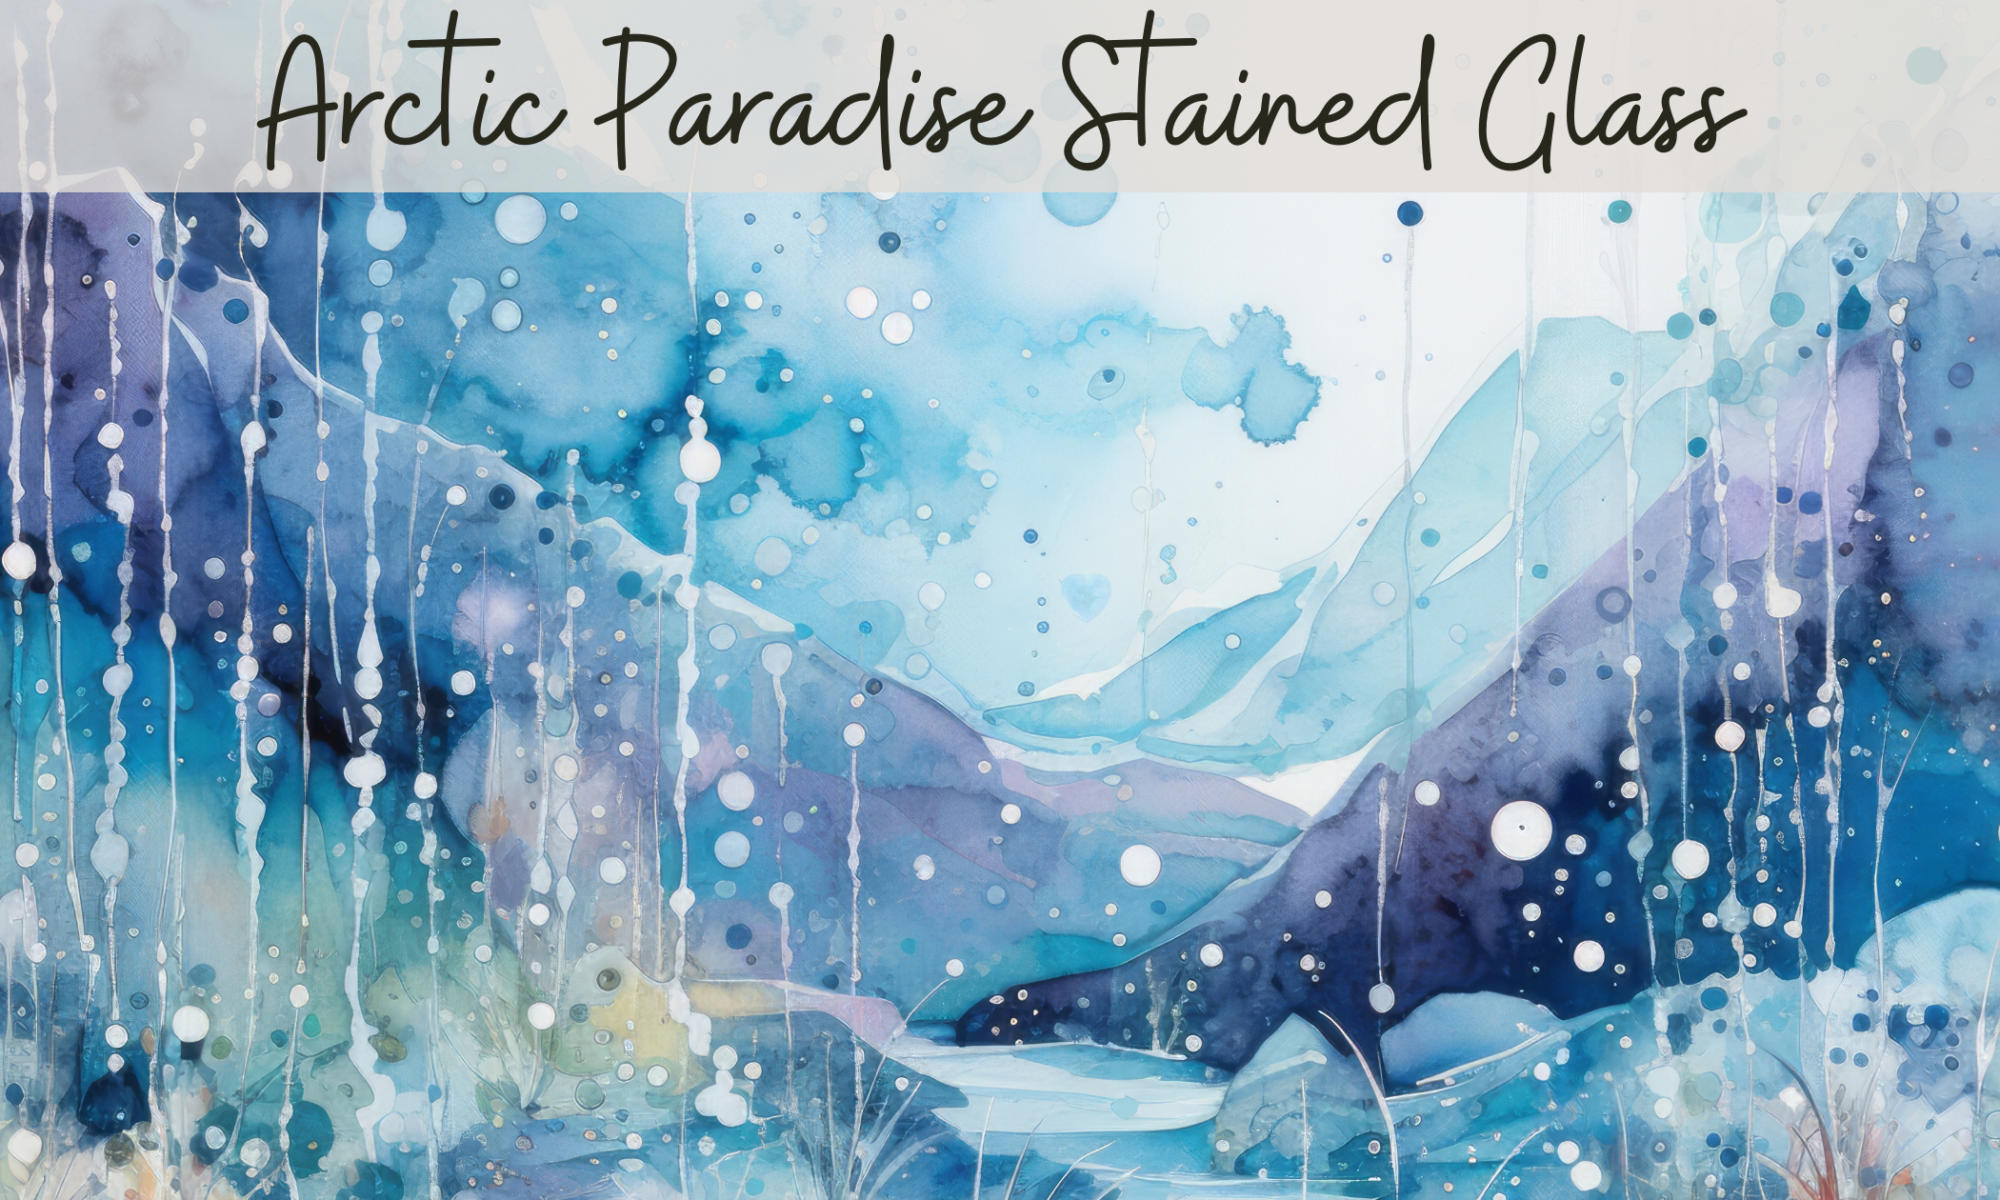 Arctic Paradise Stained Glass by Mary Ann Benoit